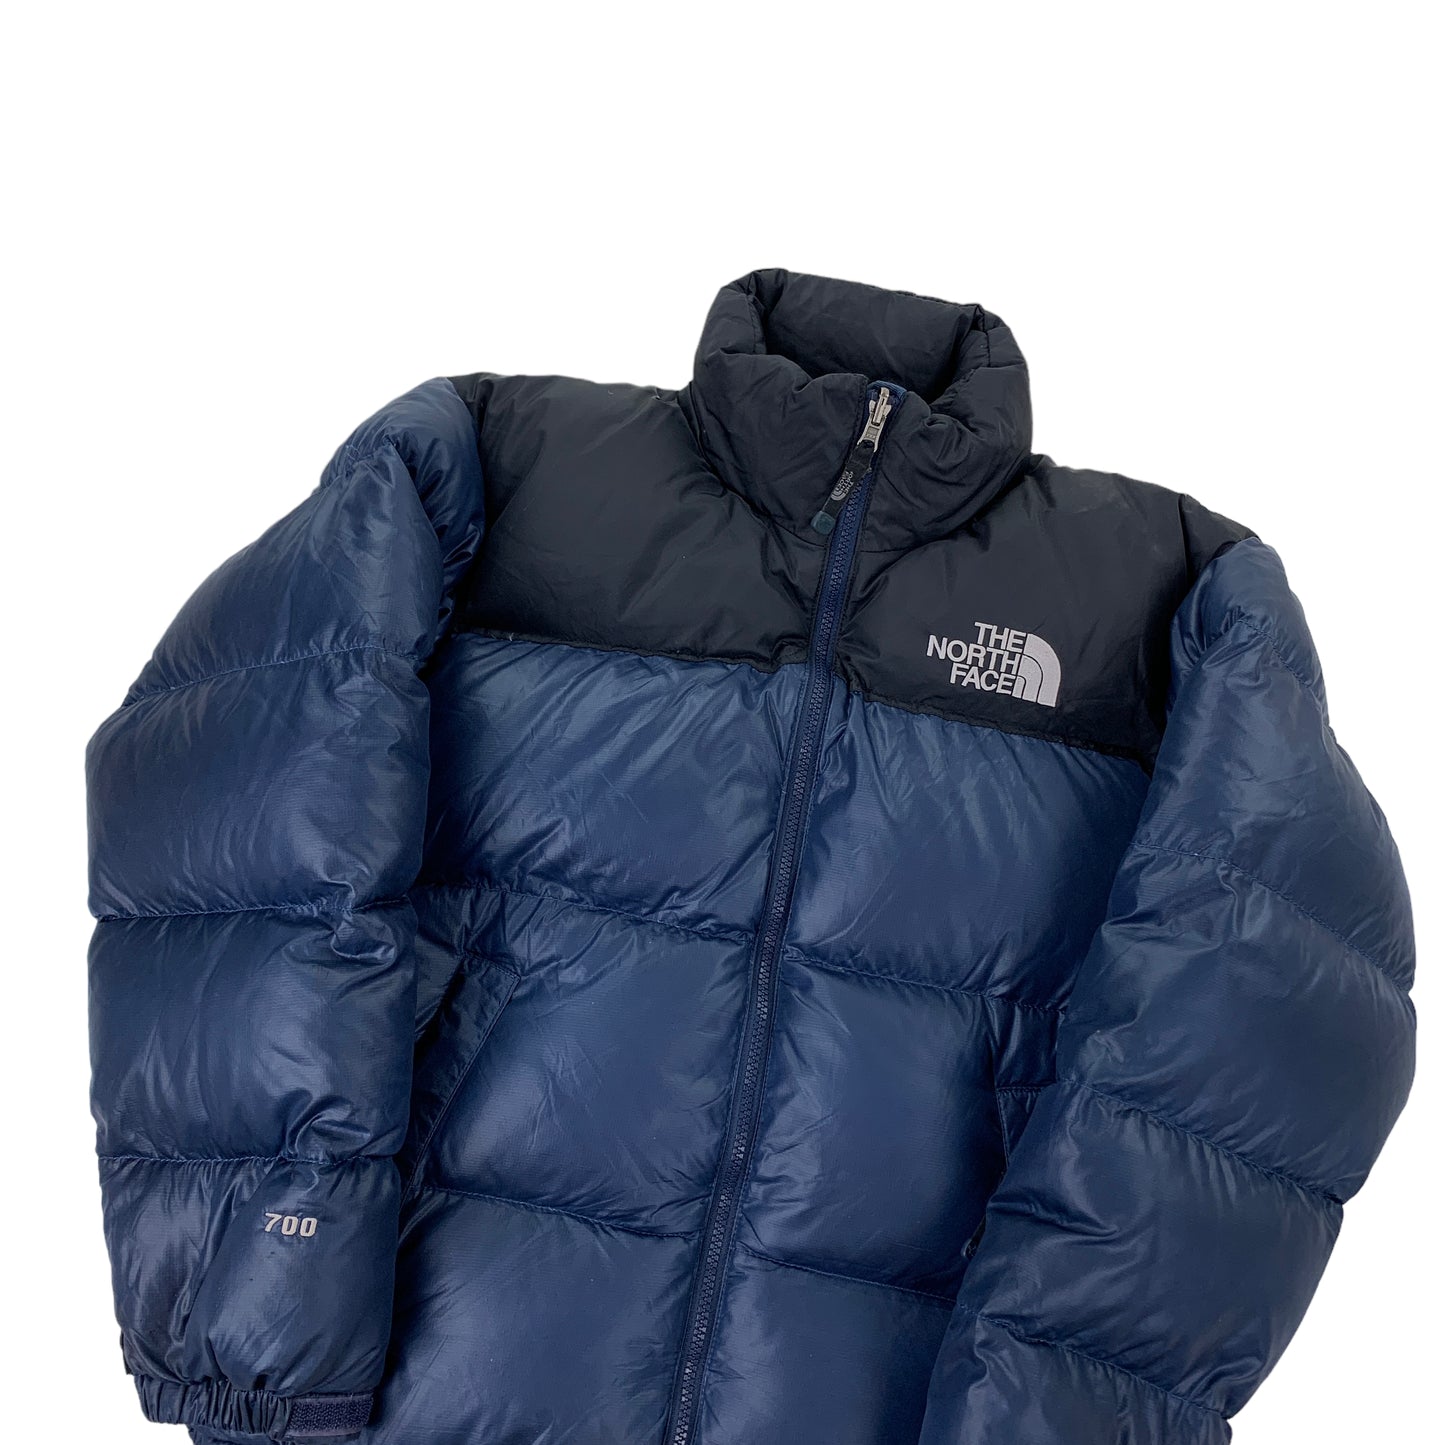 The North Face 700 Nuptse Puffer 1996 - S